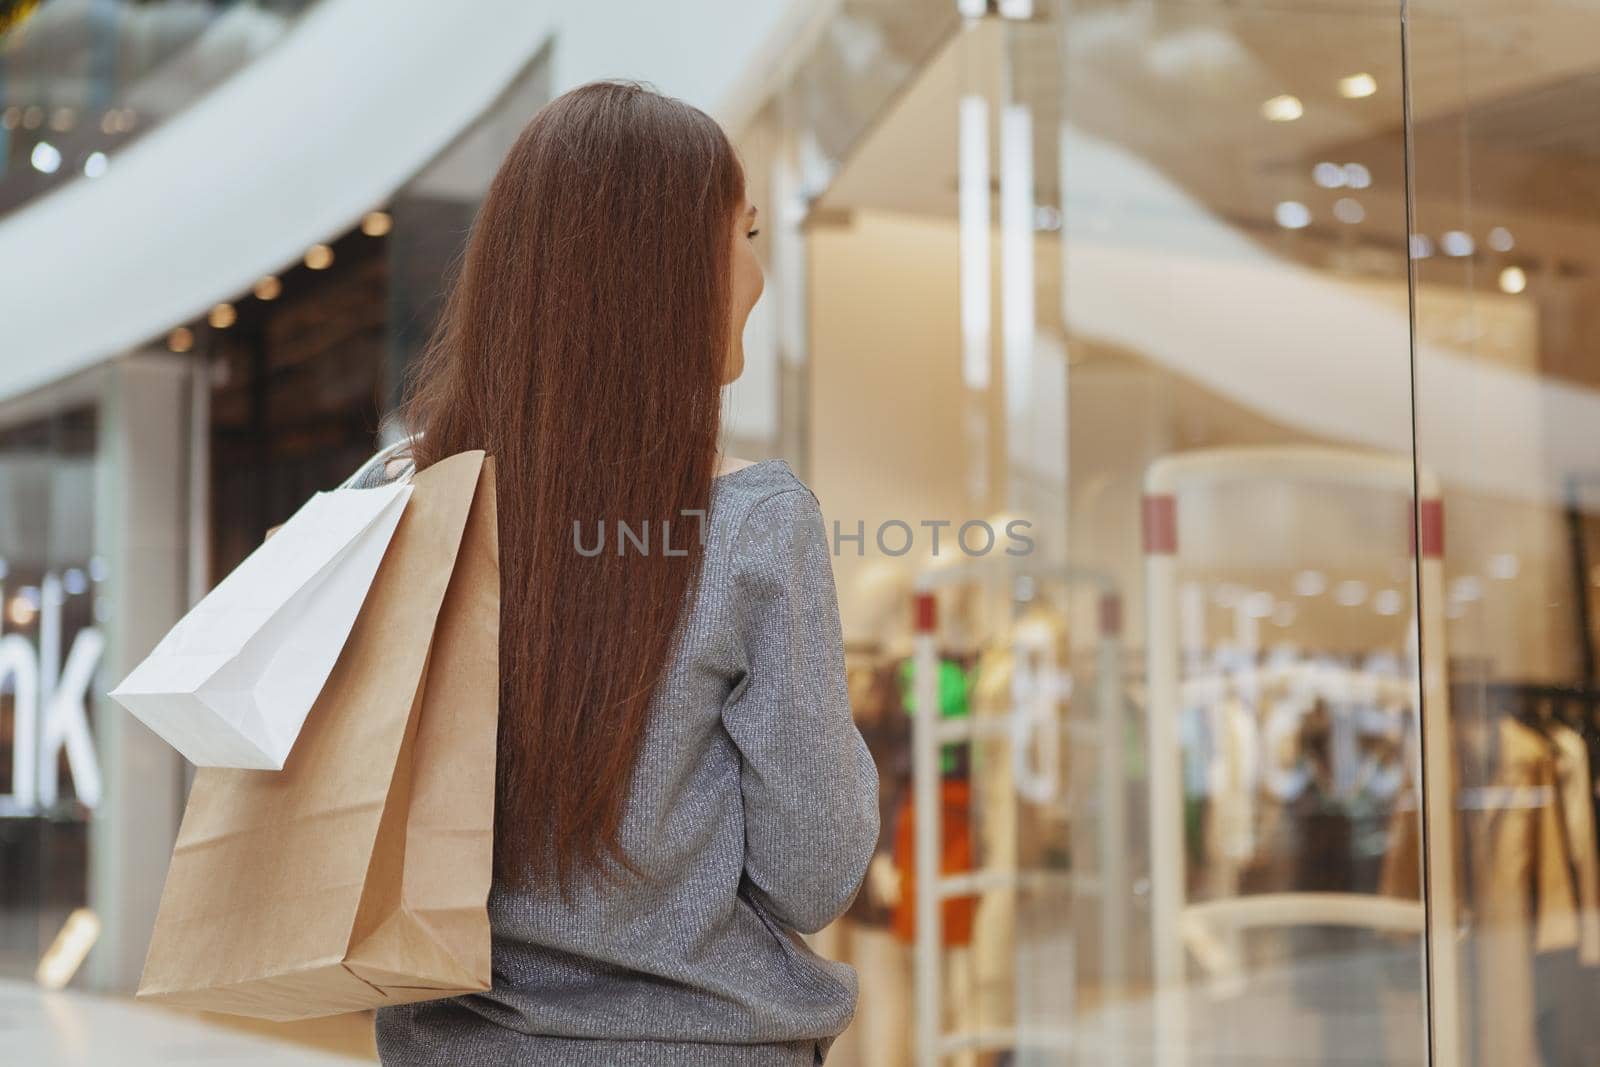 Rear view shot of a female customer at the shopping mall, holding paper bags with purchase. Woman walking at the mall, enjoying seasonal sales, copy space